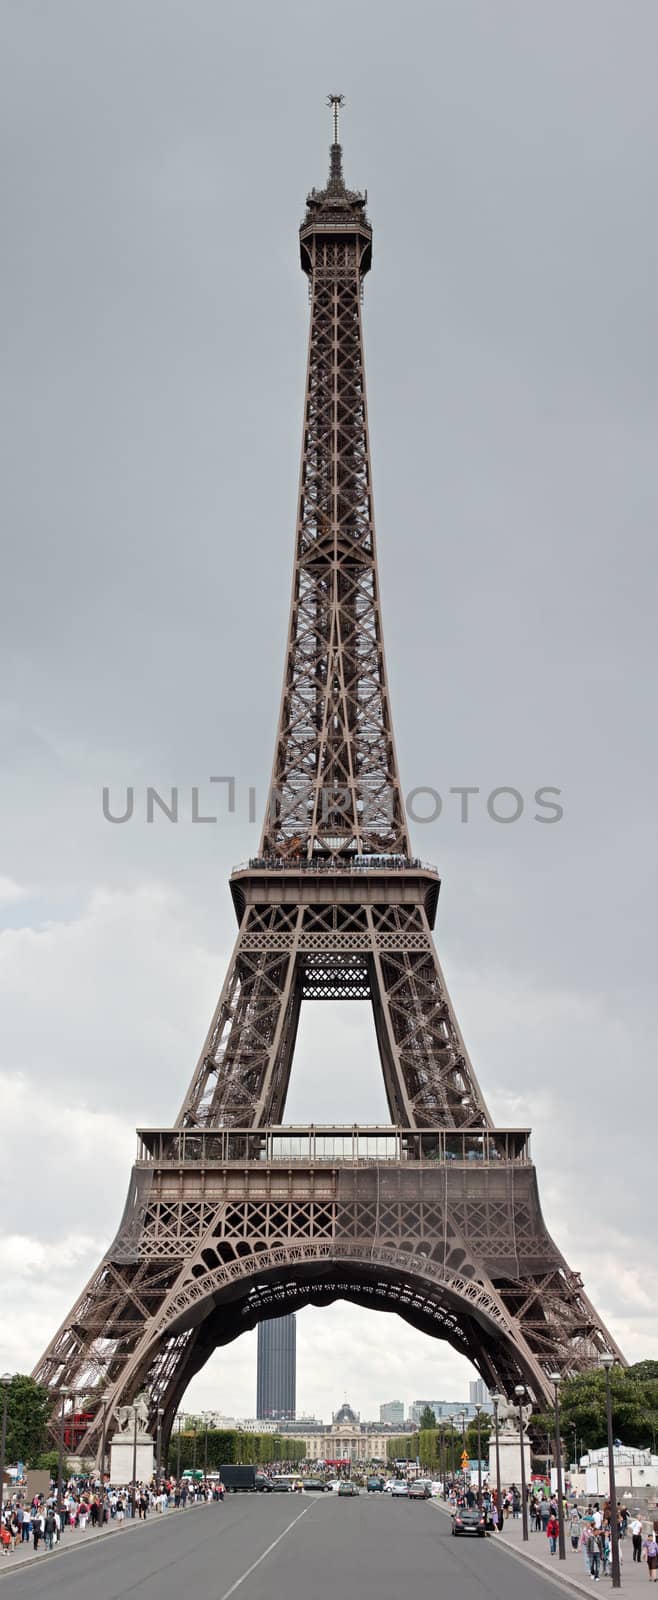 Eiffel tower on cloudy sky background taken with distinctive details (high resolution)